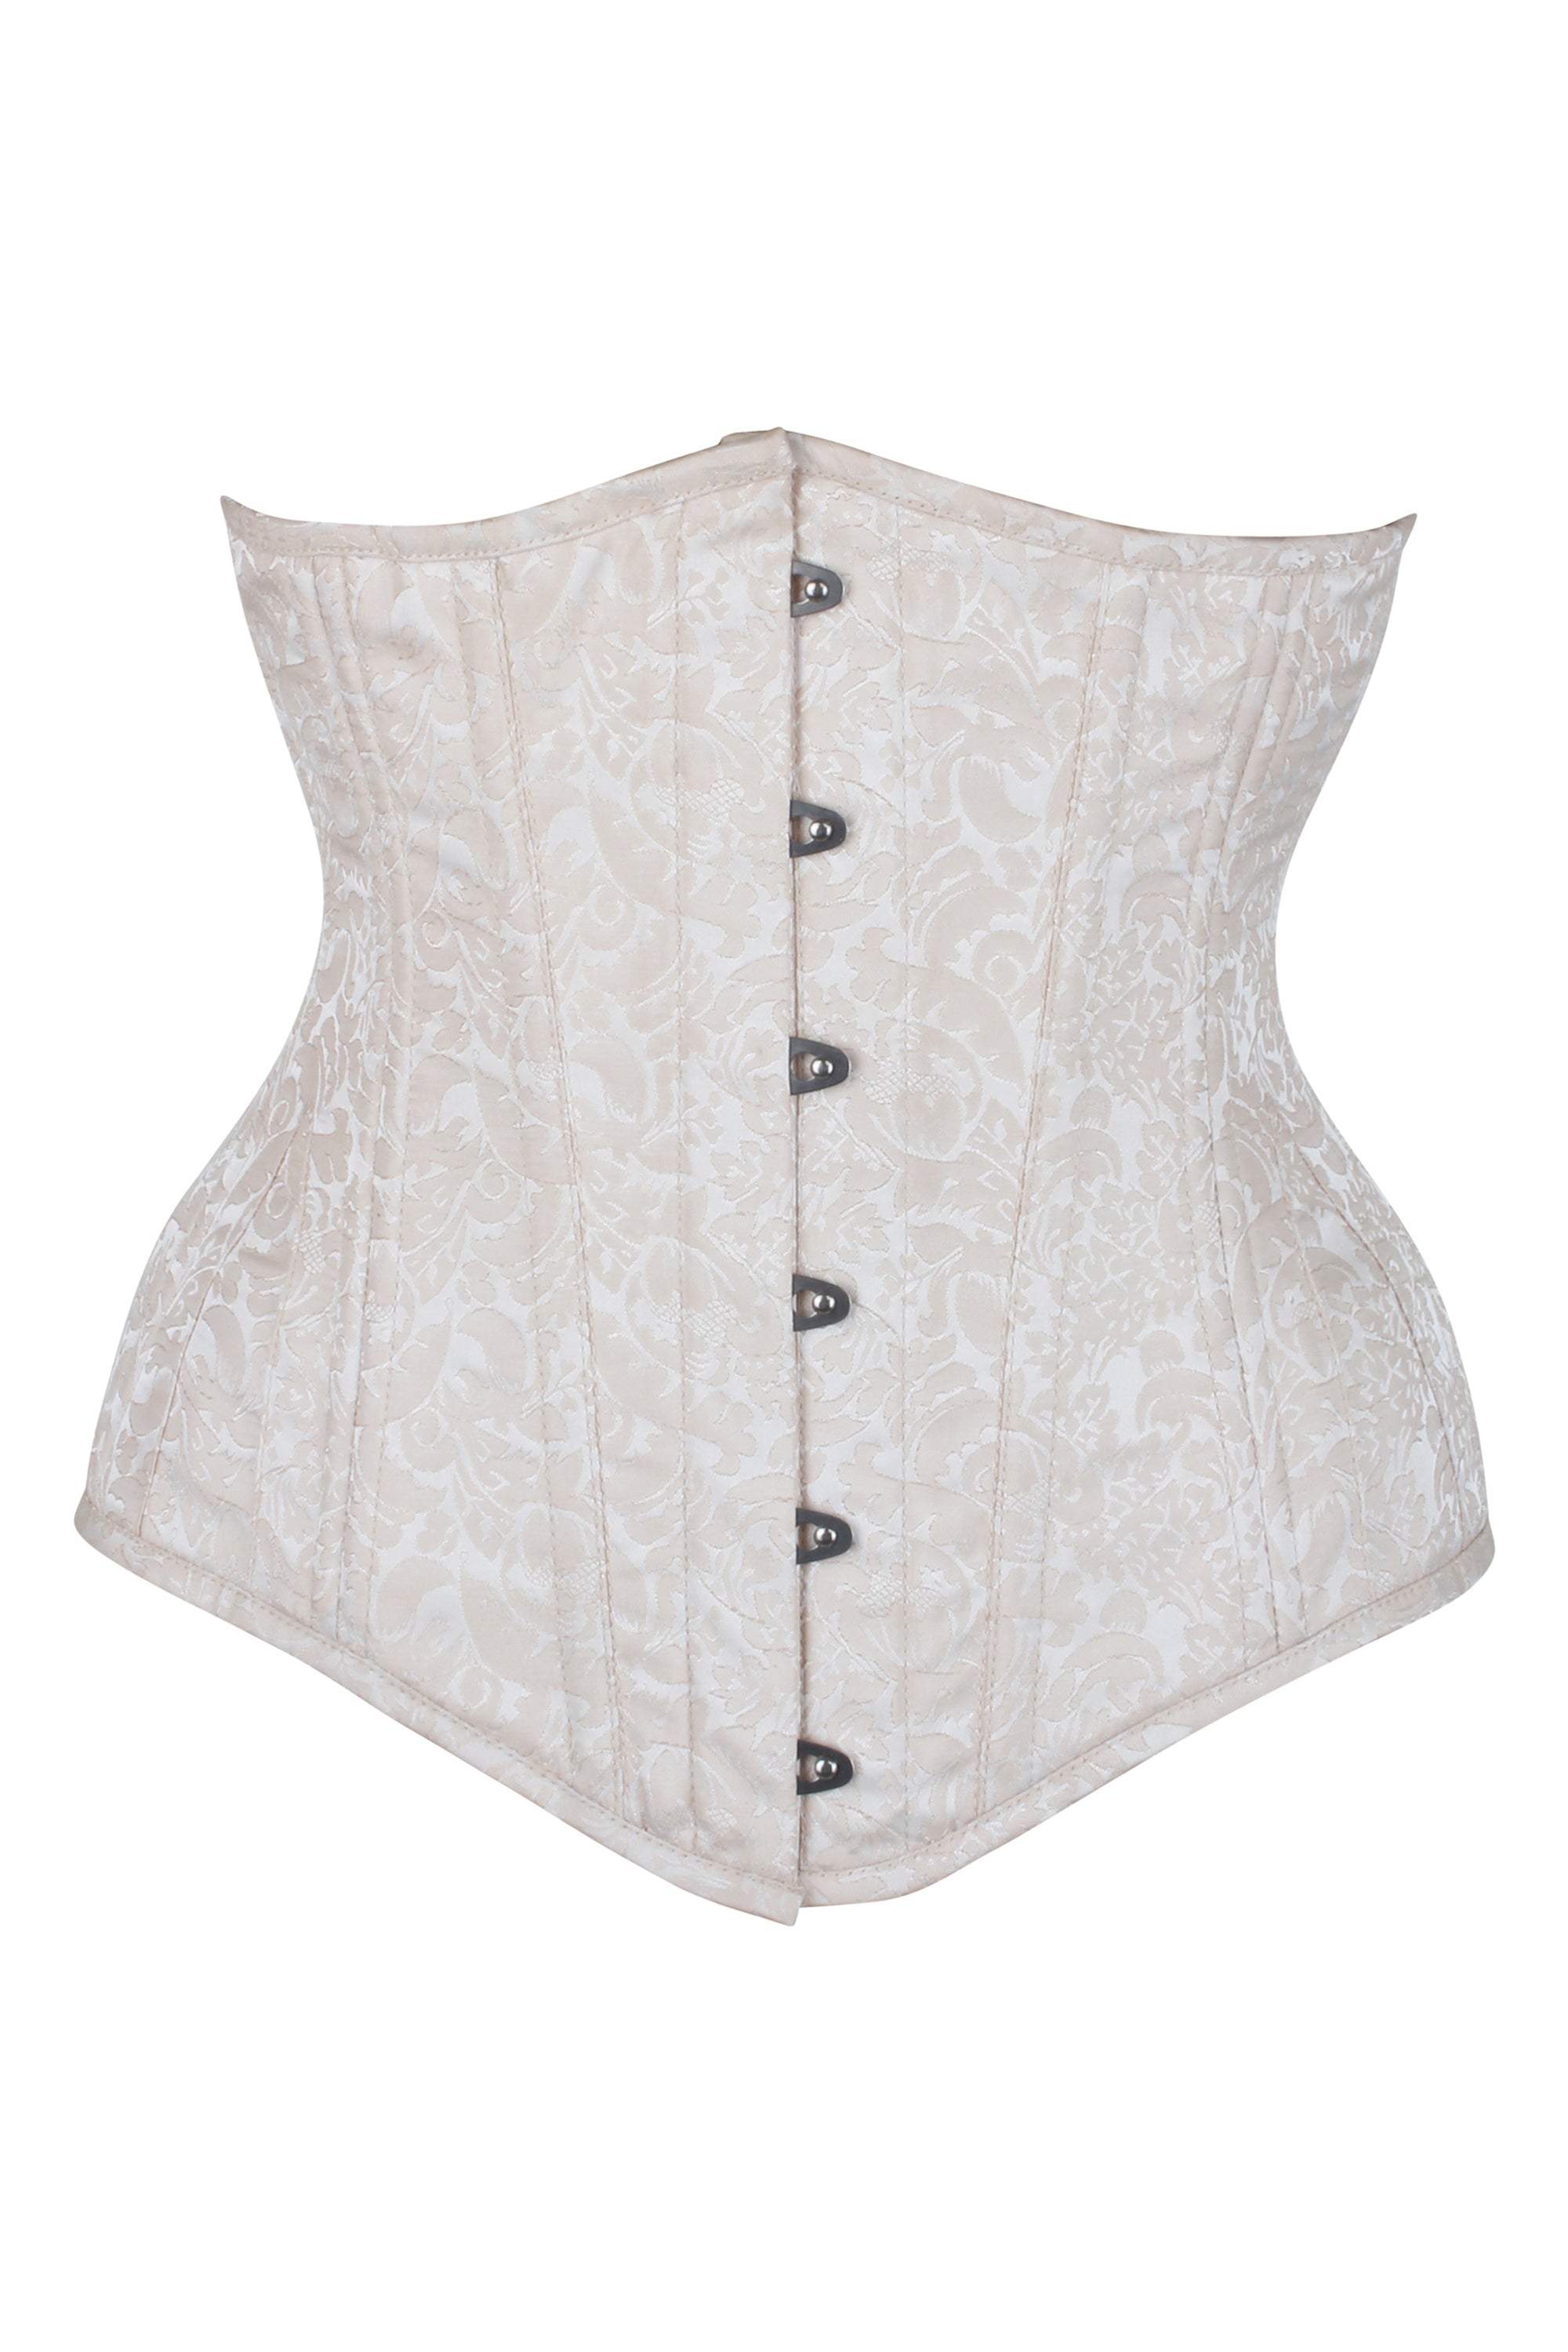 Driving in a Corset: Tips for Comfortable Driving While Waist Training